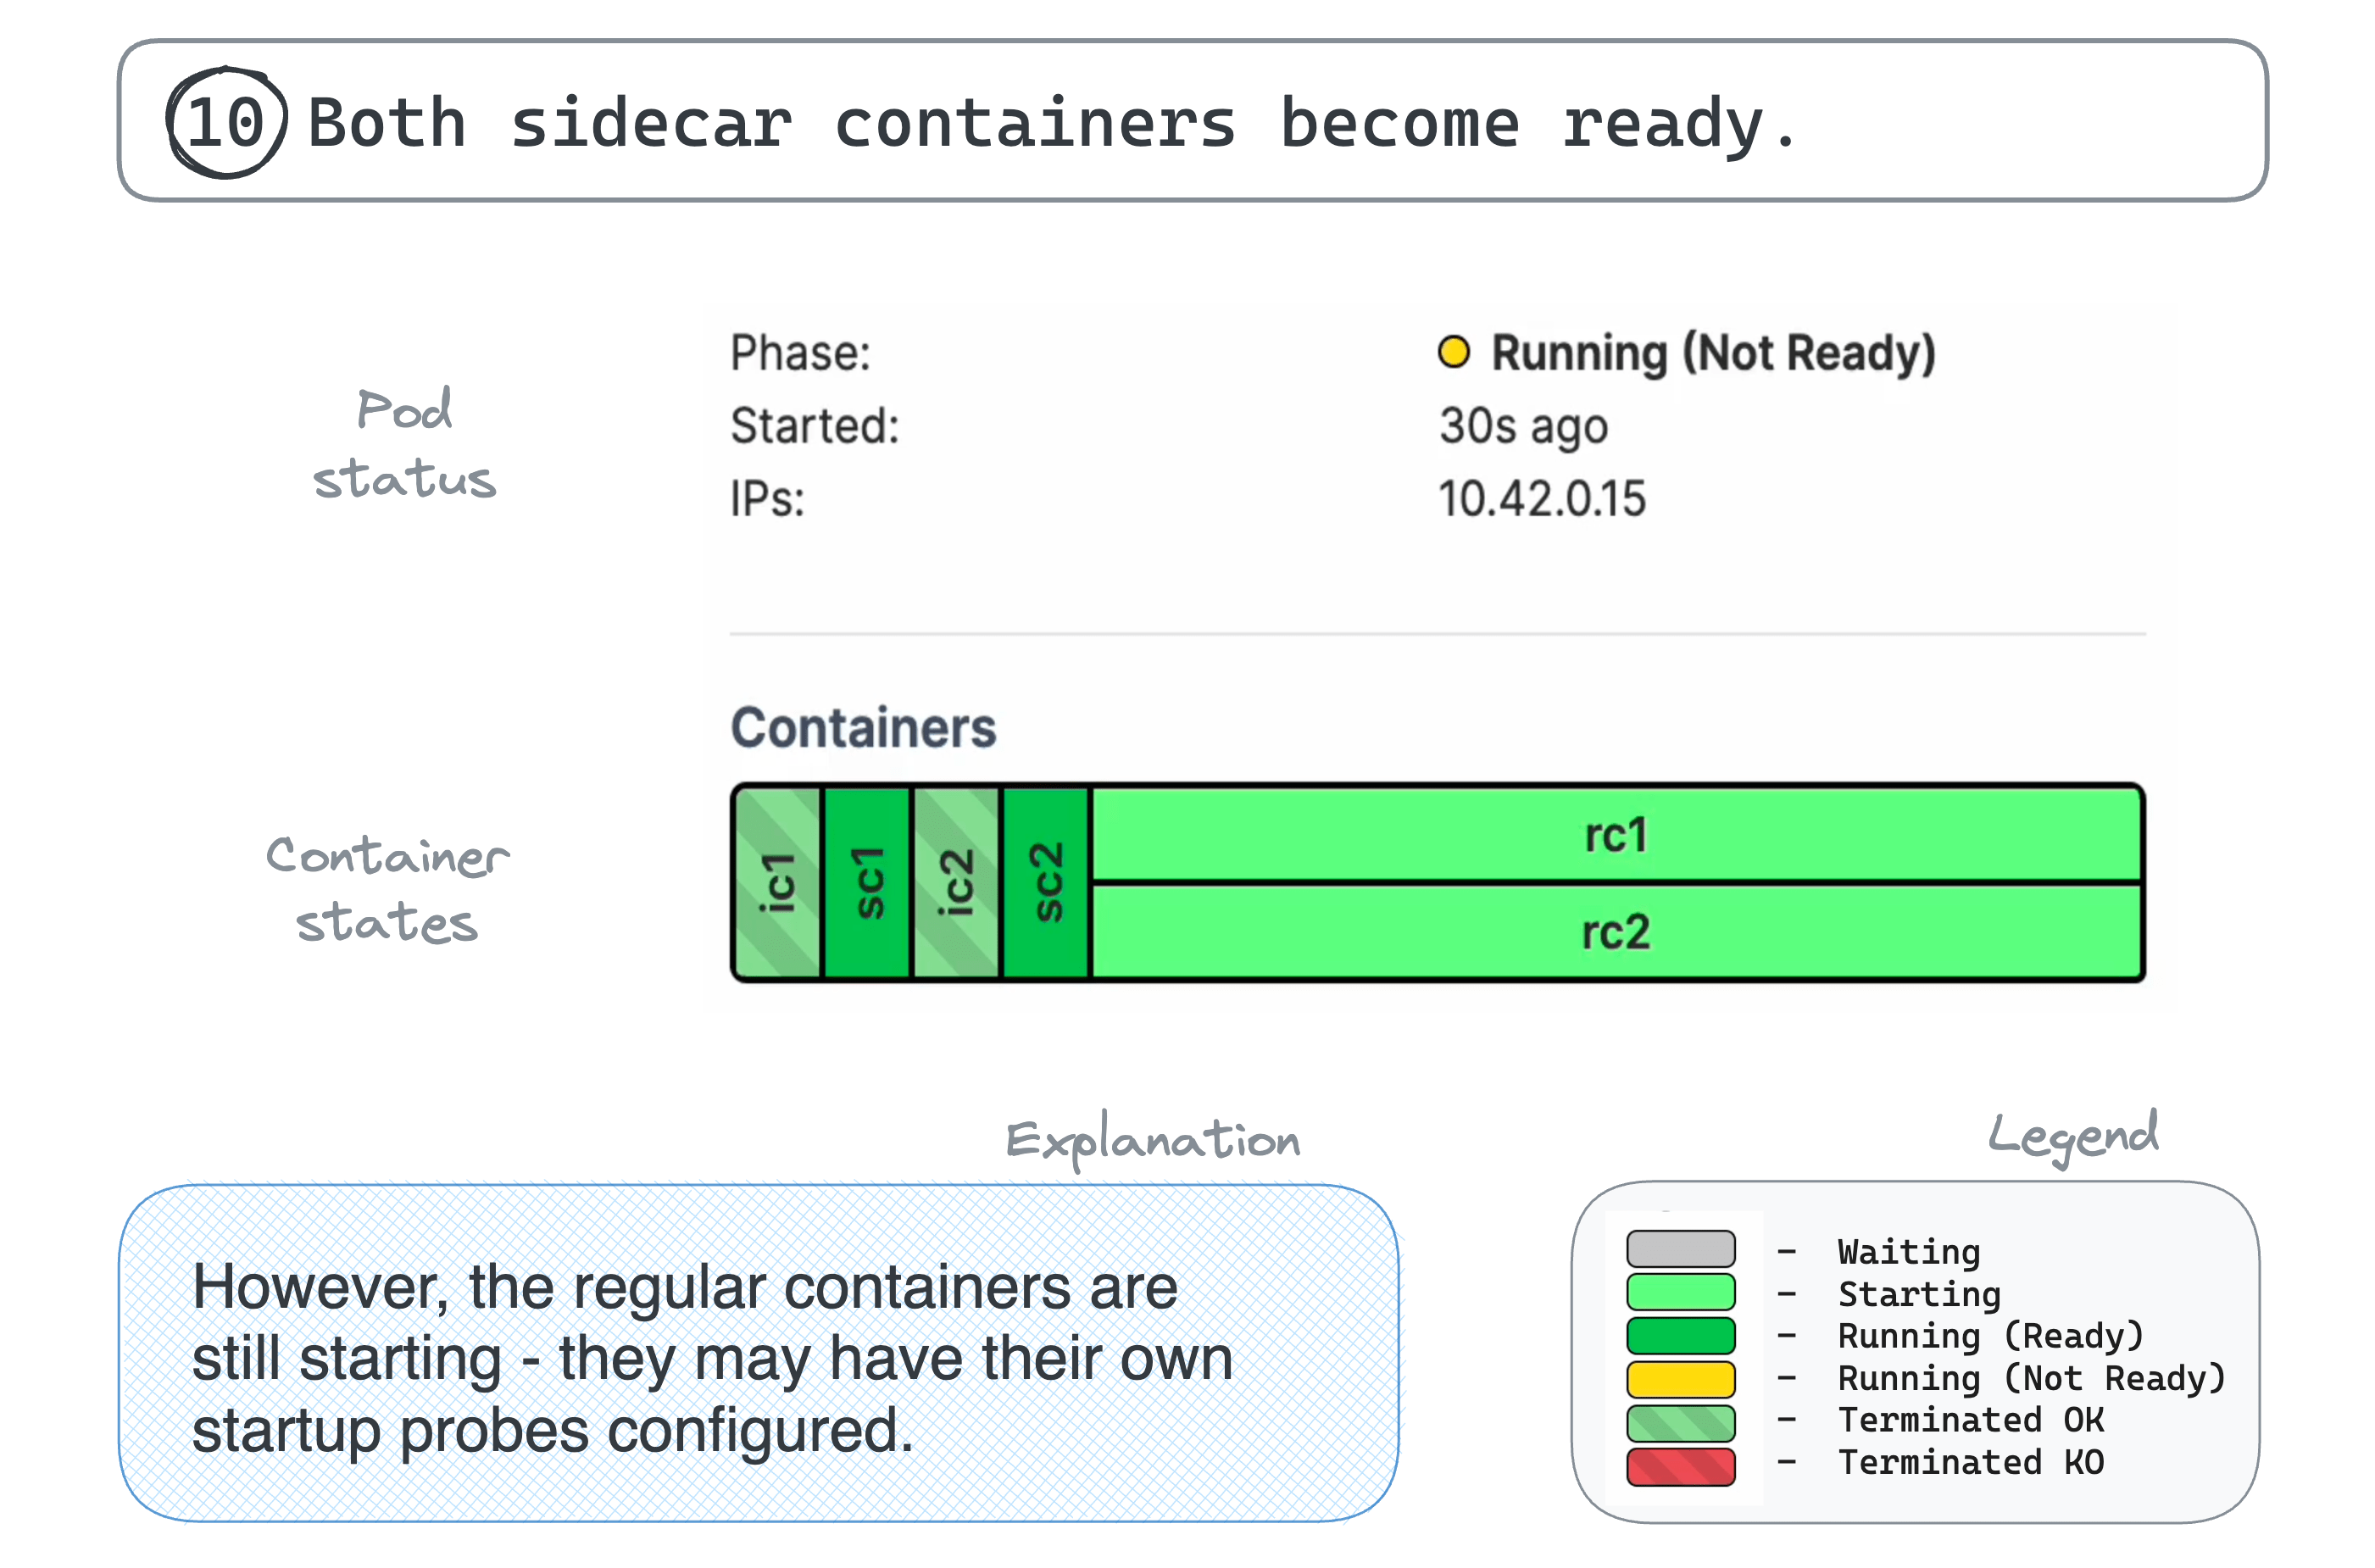 10. Both sidecar containers become ready.